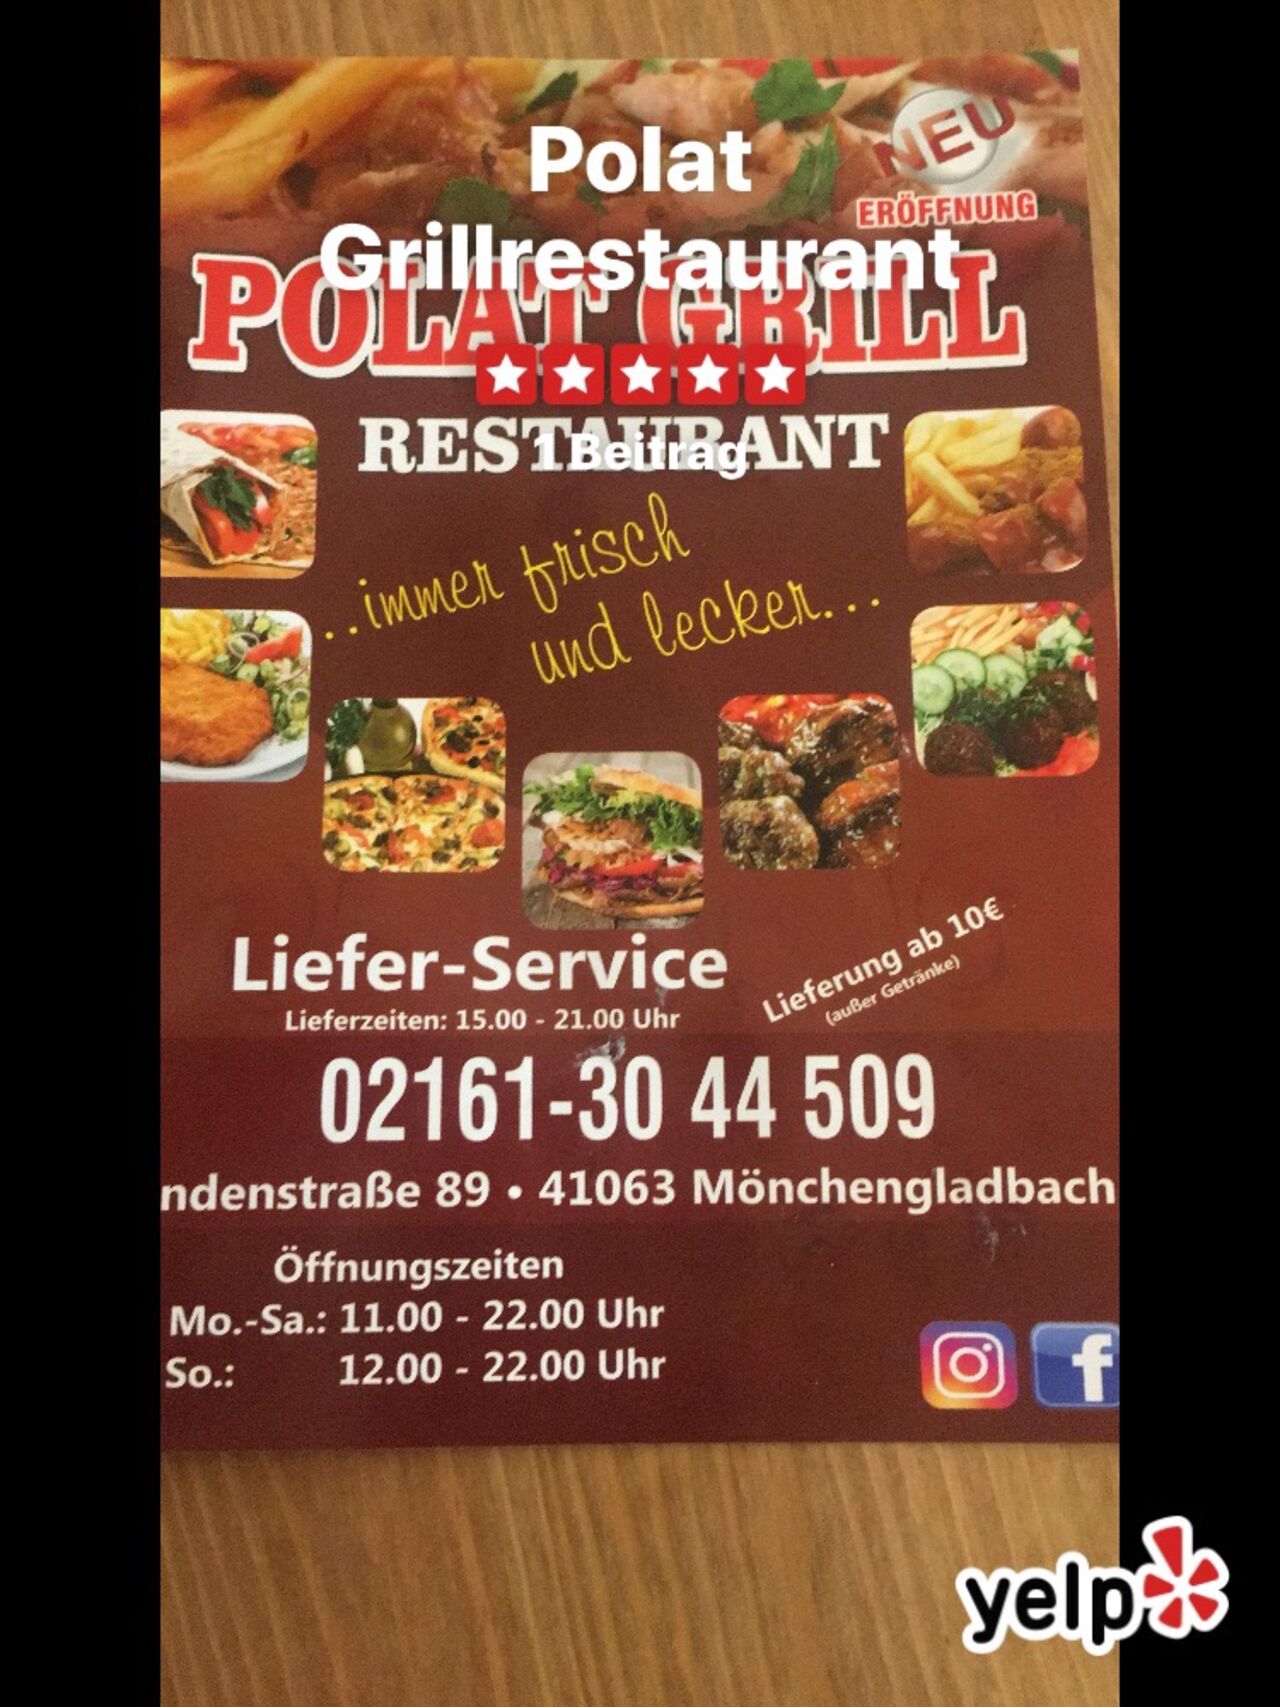 A photo of Polat Grill